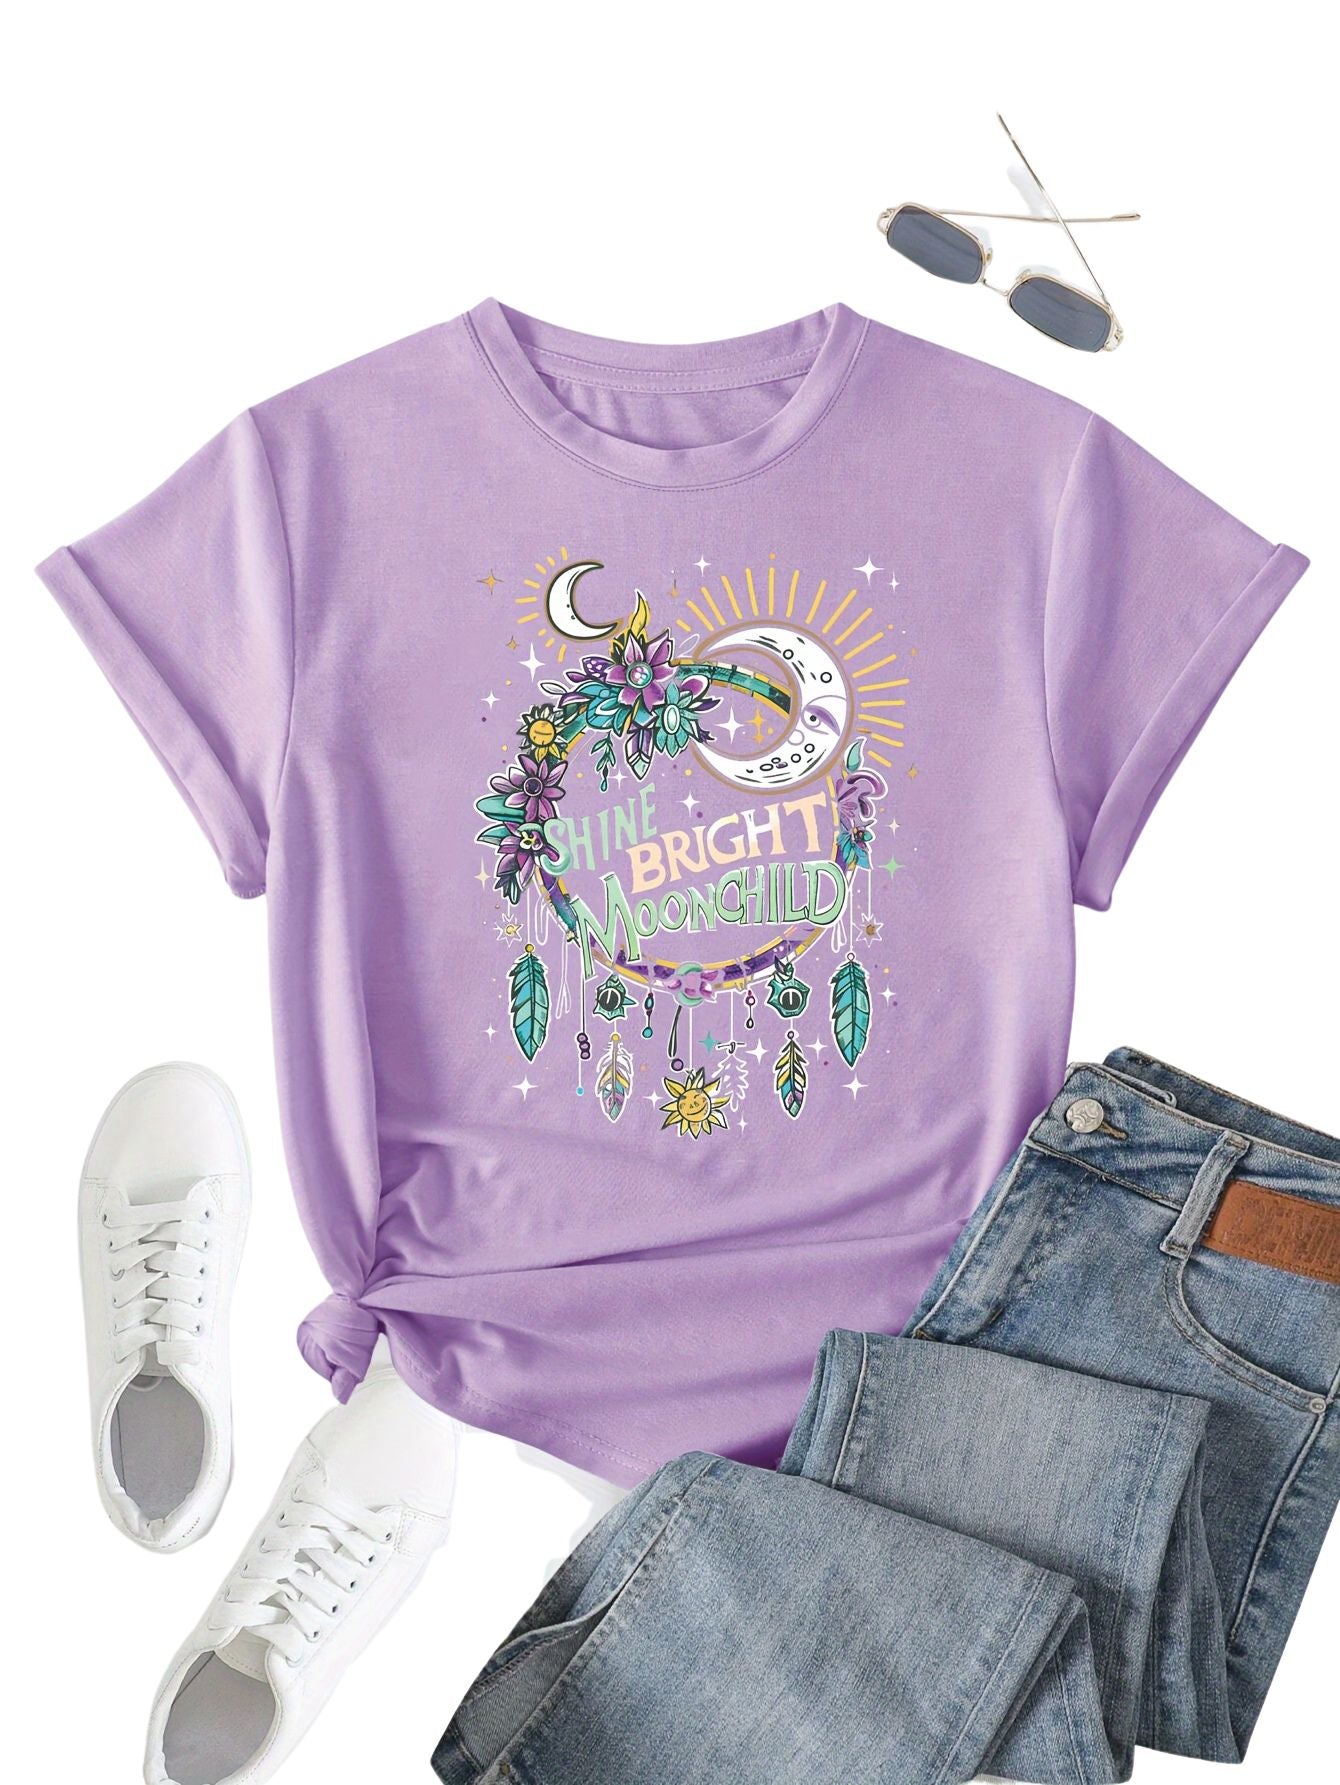 Floral Print T-shirt, Short Sleeve Crew Neck Casual Top For Summer & Spring, Women's Clothing